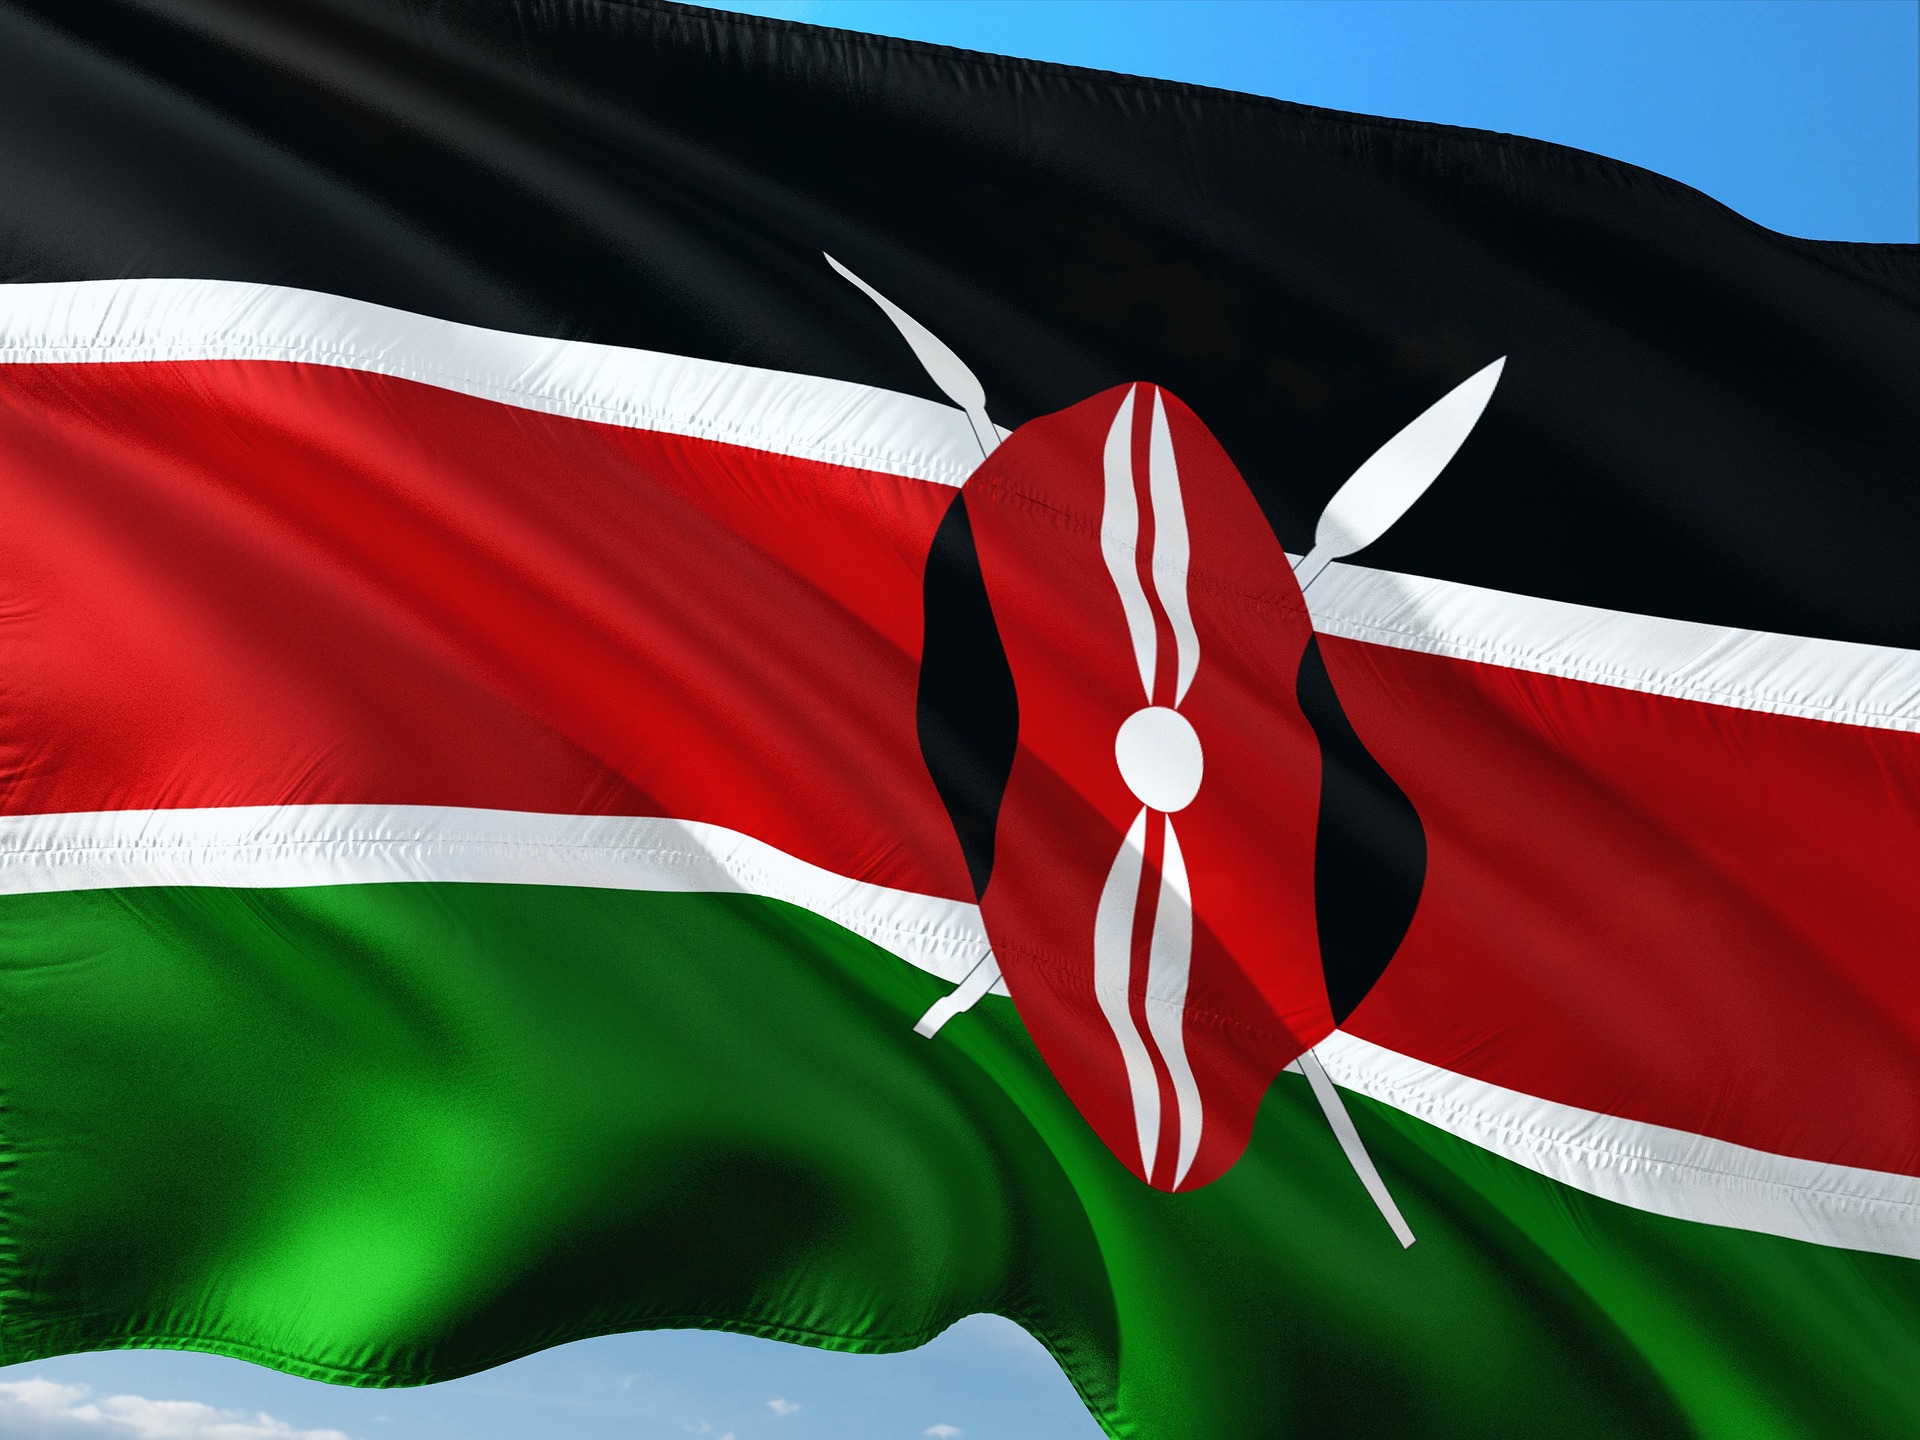 The Venom Foundation is partnering with the Kenyan government to establish a Blockchain Hub in Africa